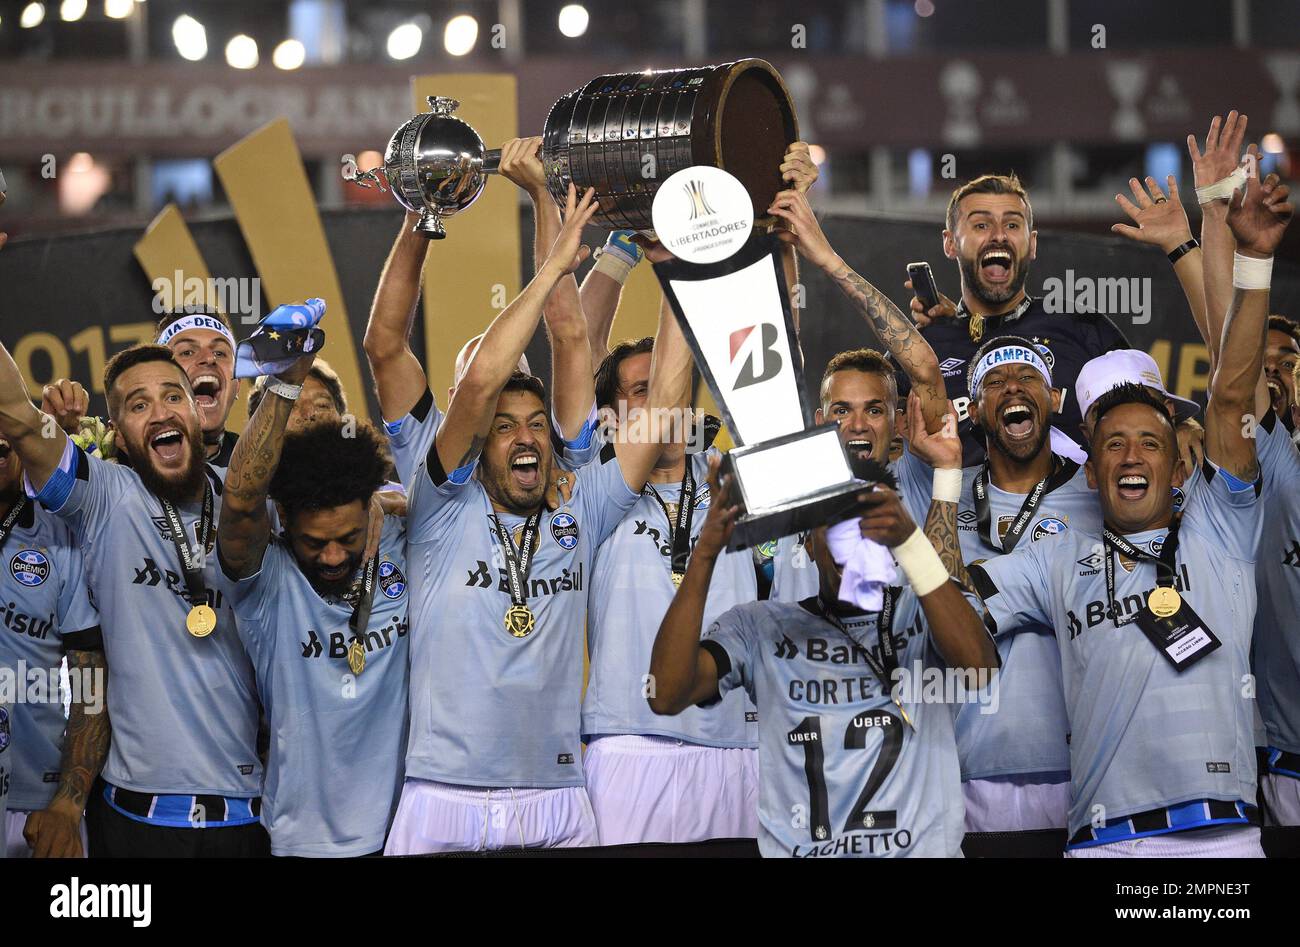 Brazil's Gremio soccer team celebrates winning the Copa Libertadores championship after playing Argentina's Lanus in Buenos Aires, Argentina, Wednesday, Nov. 29, 2017. (AP Photo/Gustavo Garello) Stock Photo